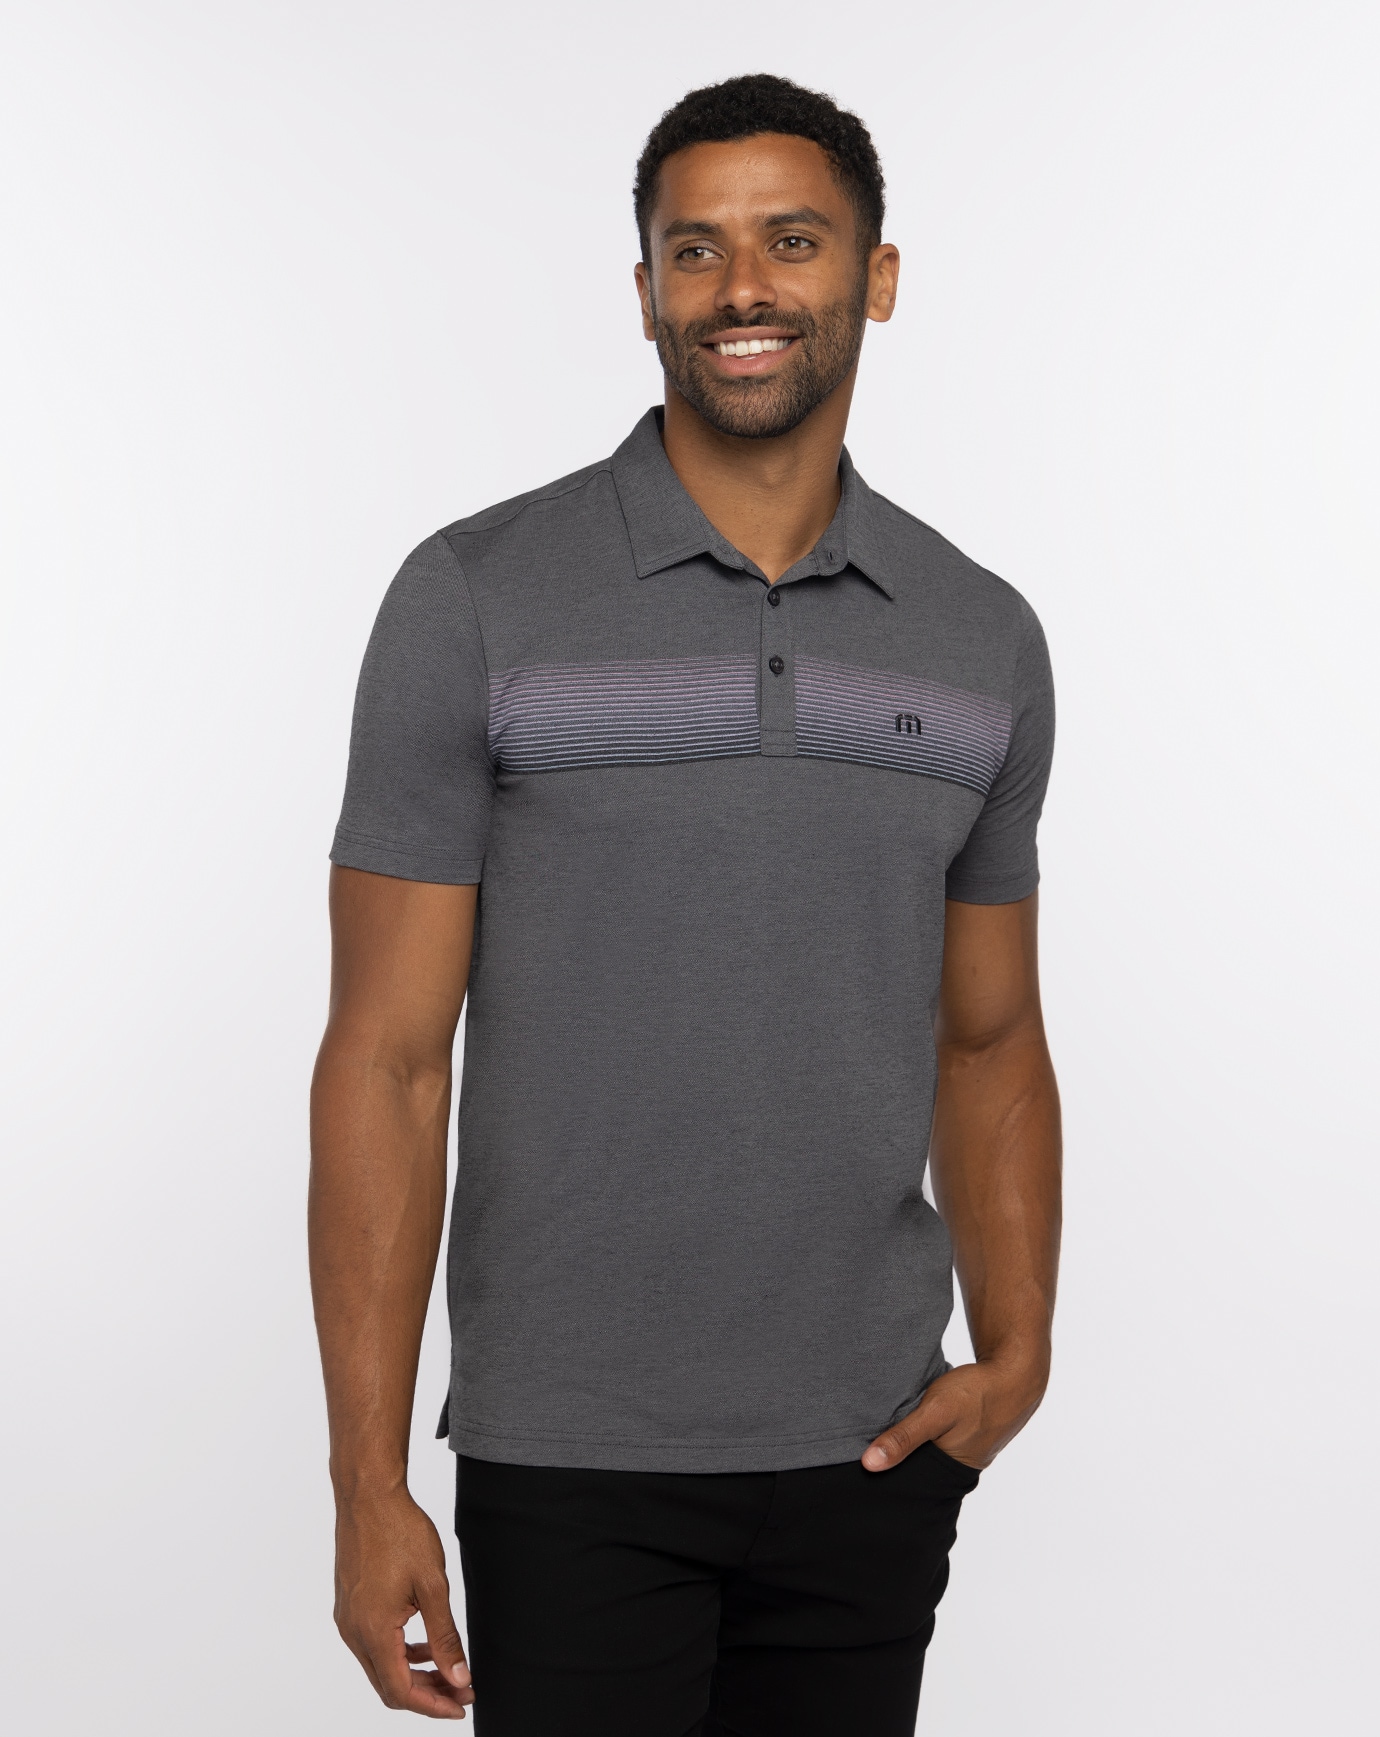 Related Product - HORCHATA POLO